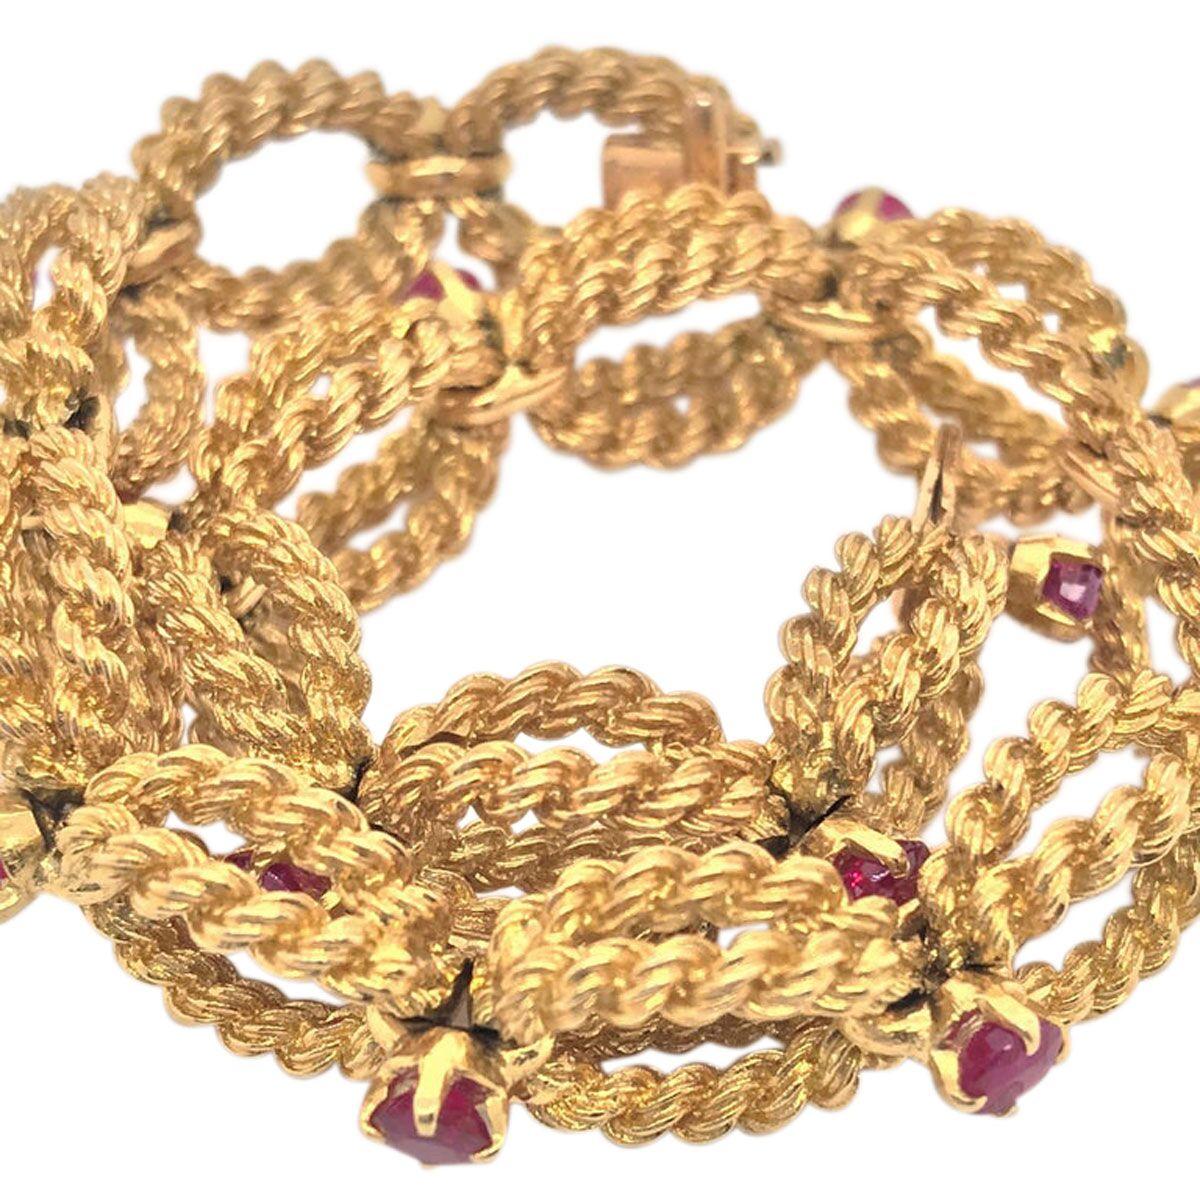 Elegant and so wearable for every occasion, this 18k yellow gold woven rope link bracelet looks sophisticated on the wrist. Each link is separated by a claw set brilliant cut ruby, 14 in all. The craftsmanship is second to none as one would expect